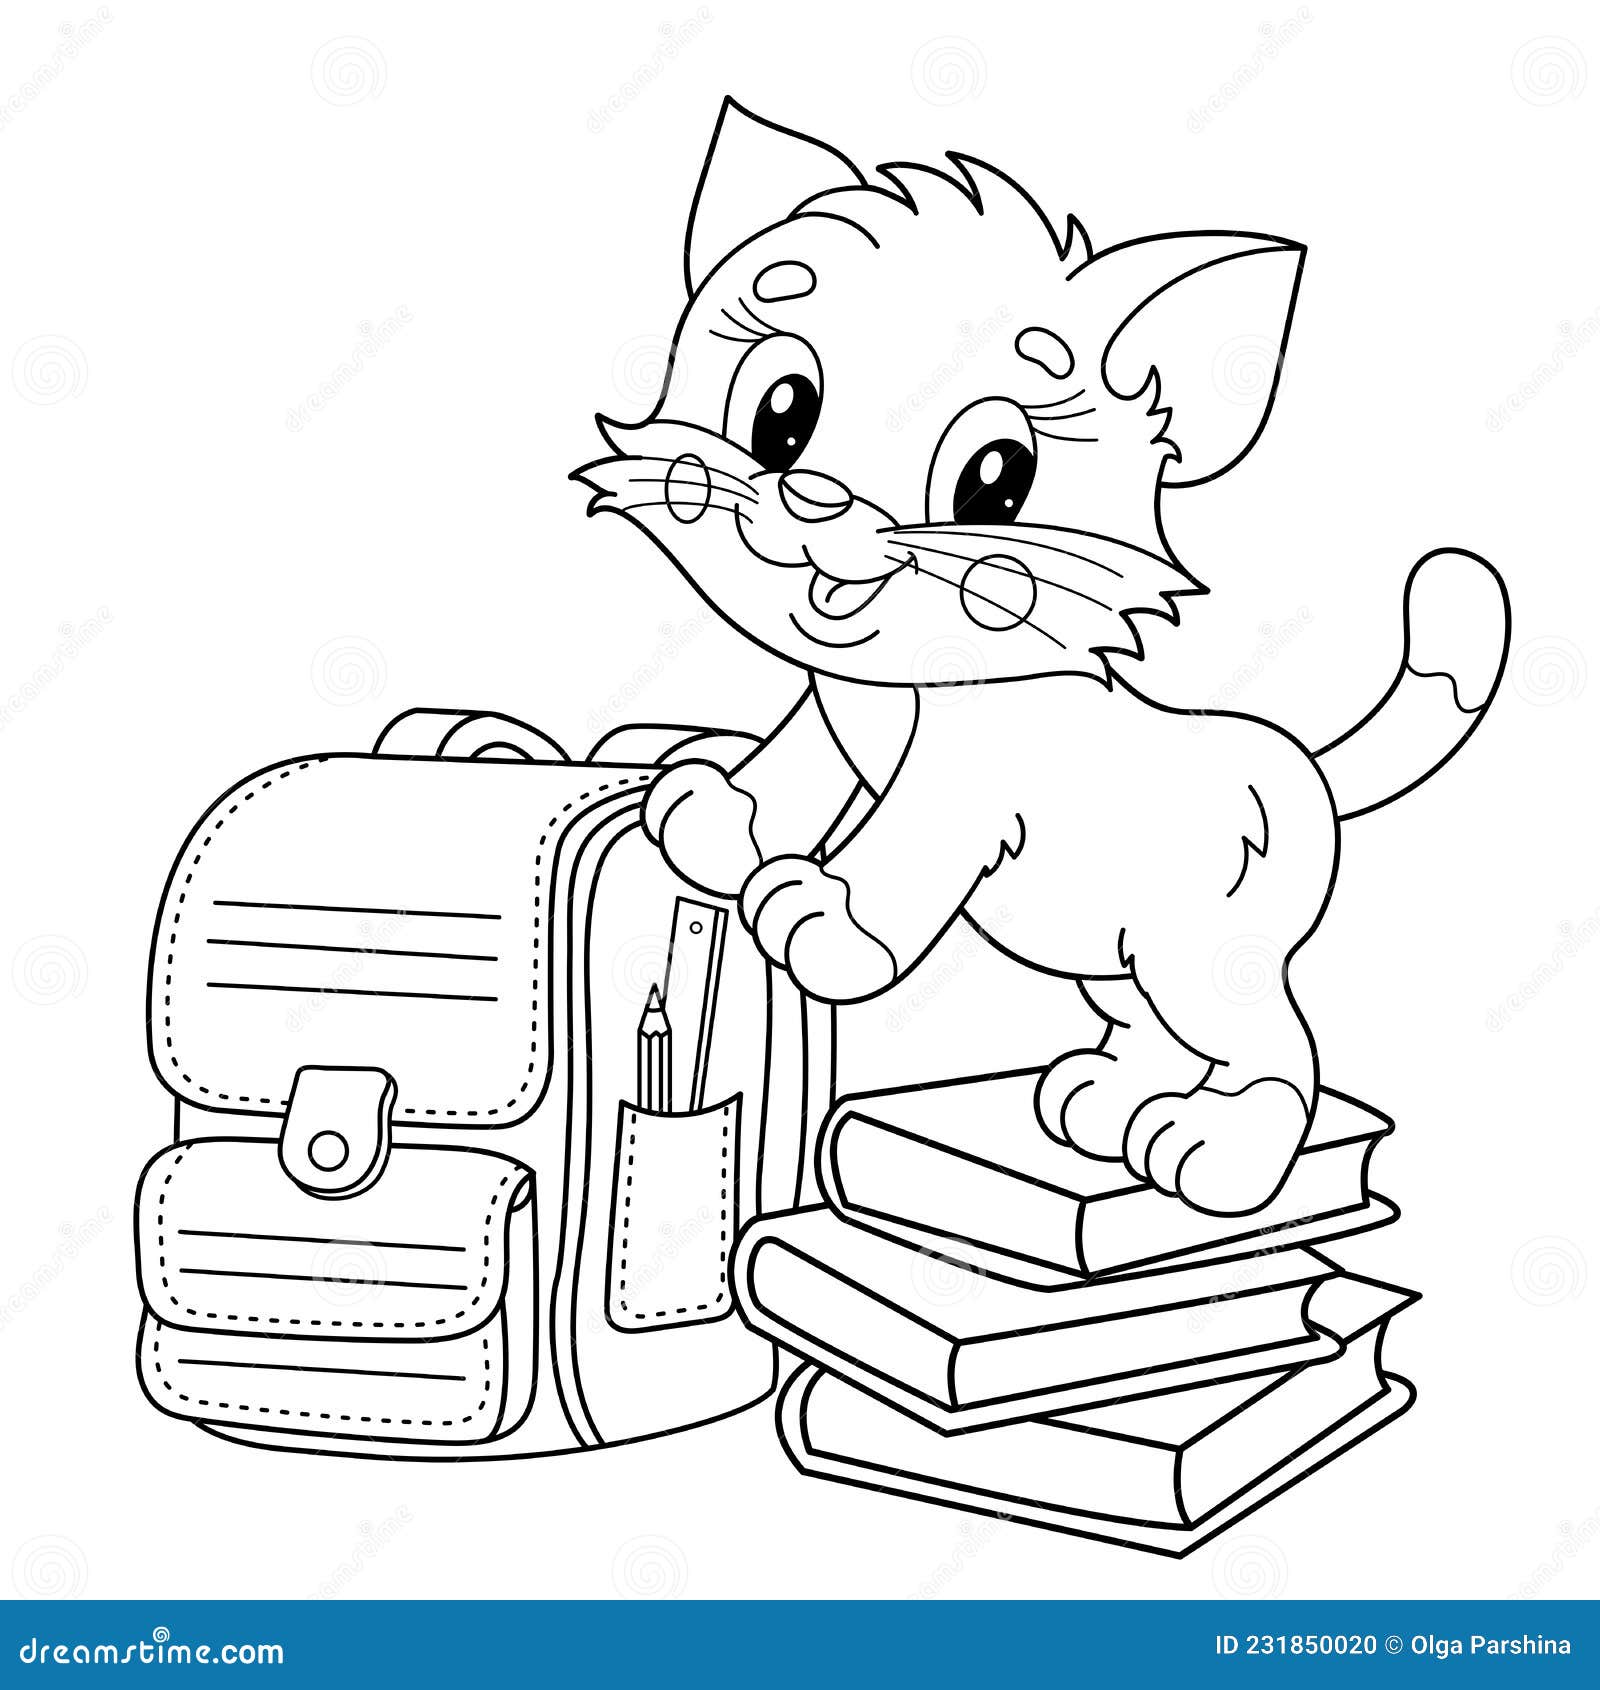 Coloring Page Outline of Cartoon Little Cat with School Supplies. Cute ...